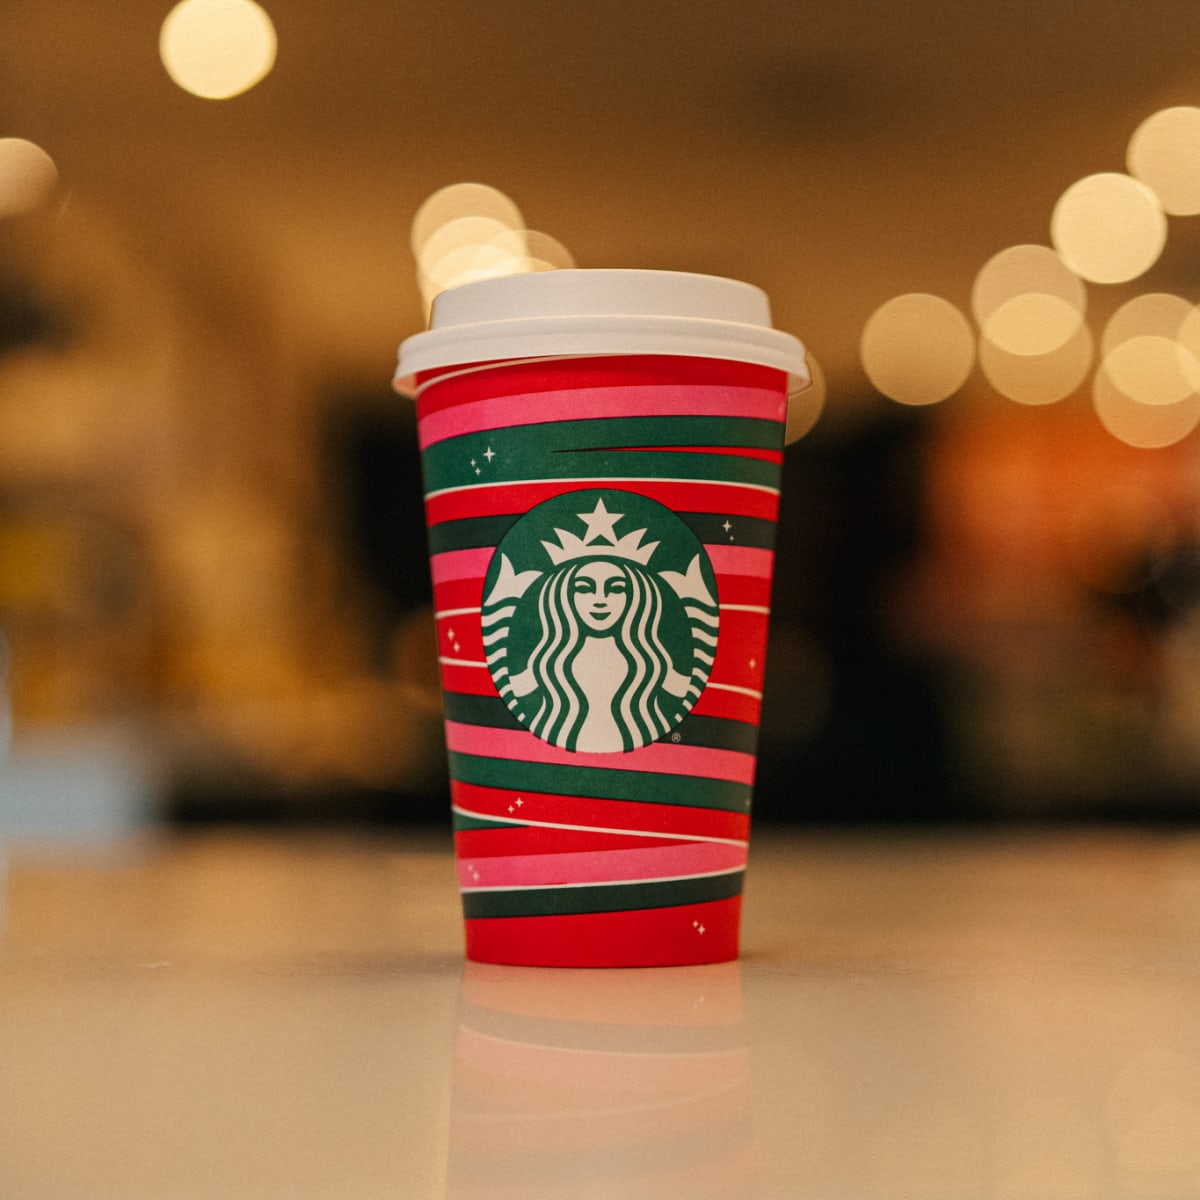 Starbucks Holiday 'Red Cups' Return for 2022